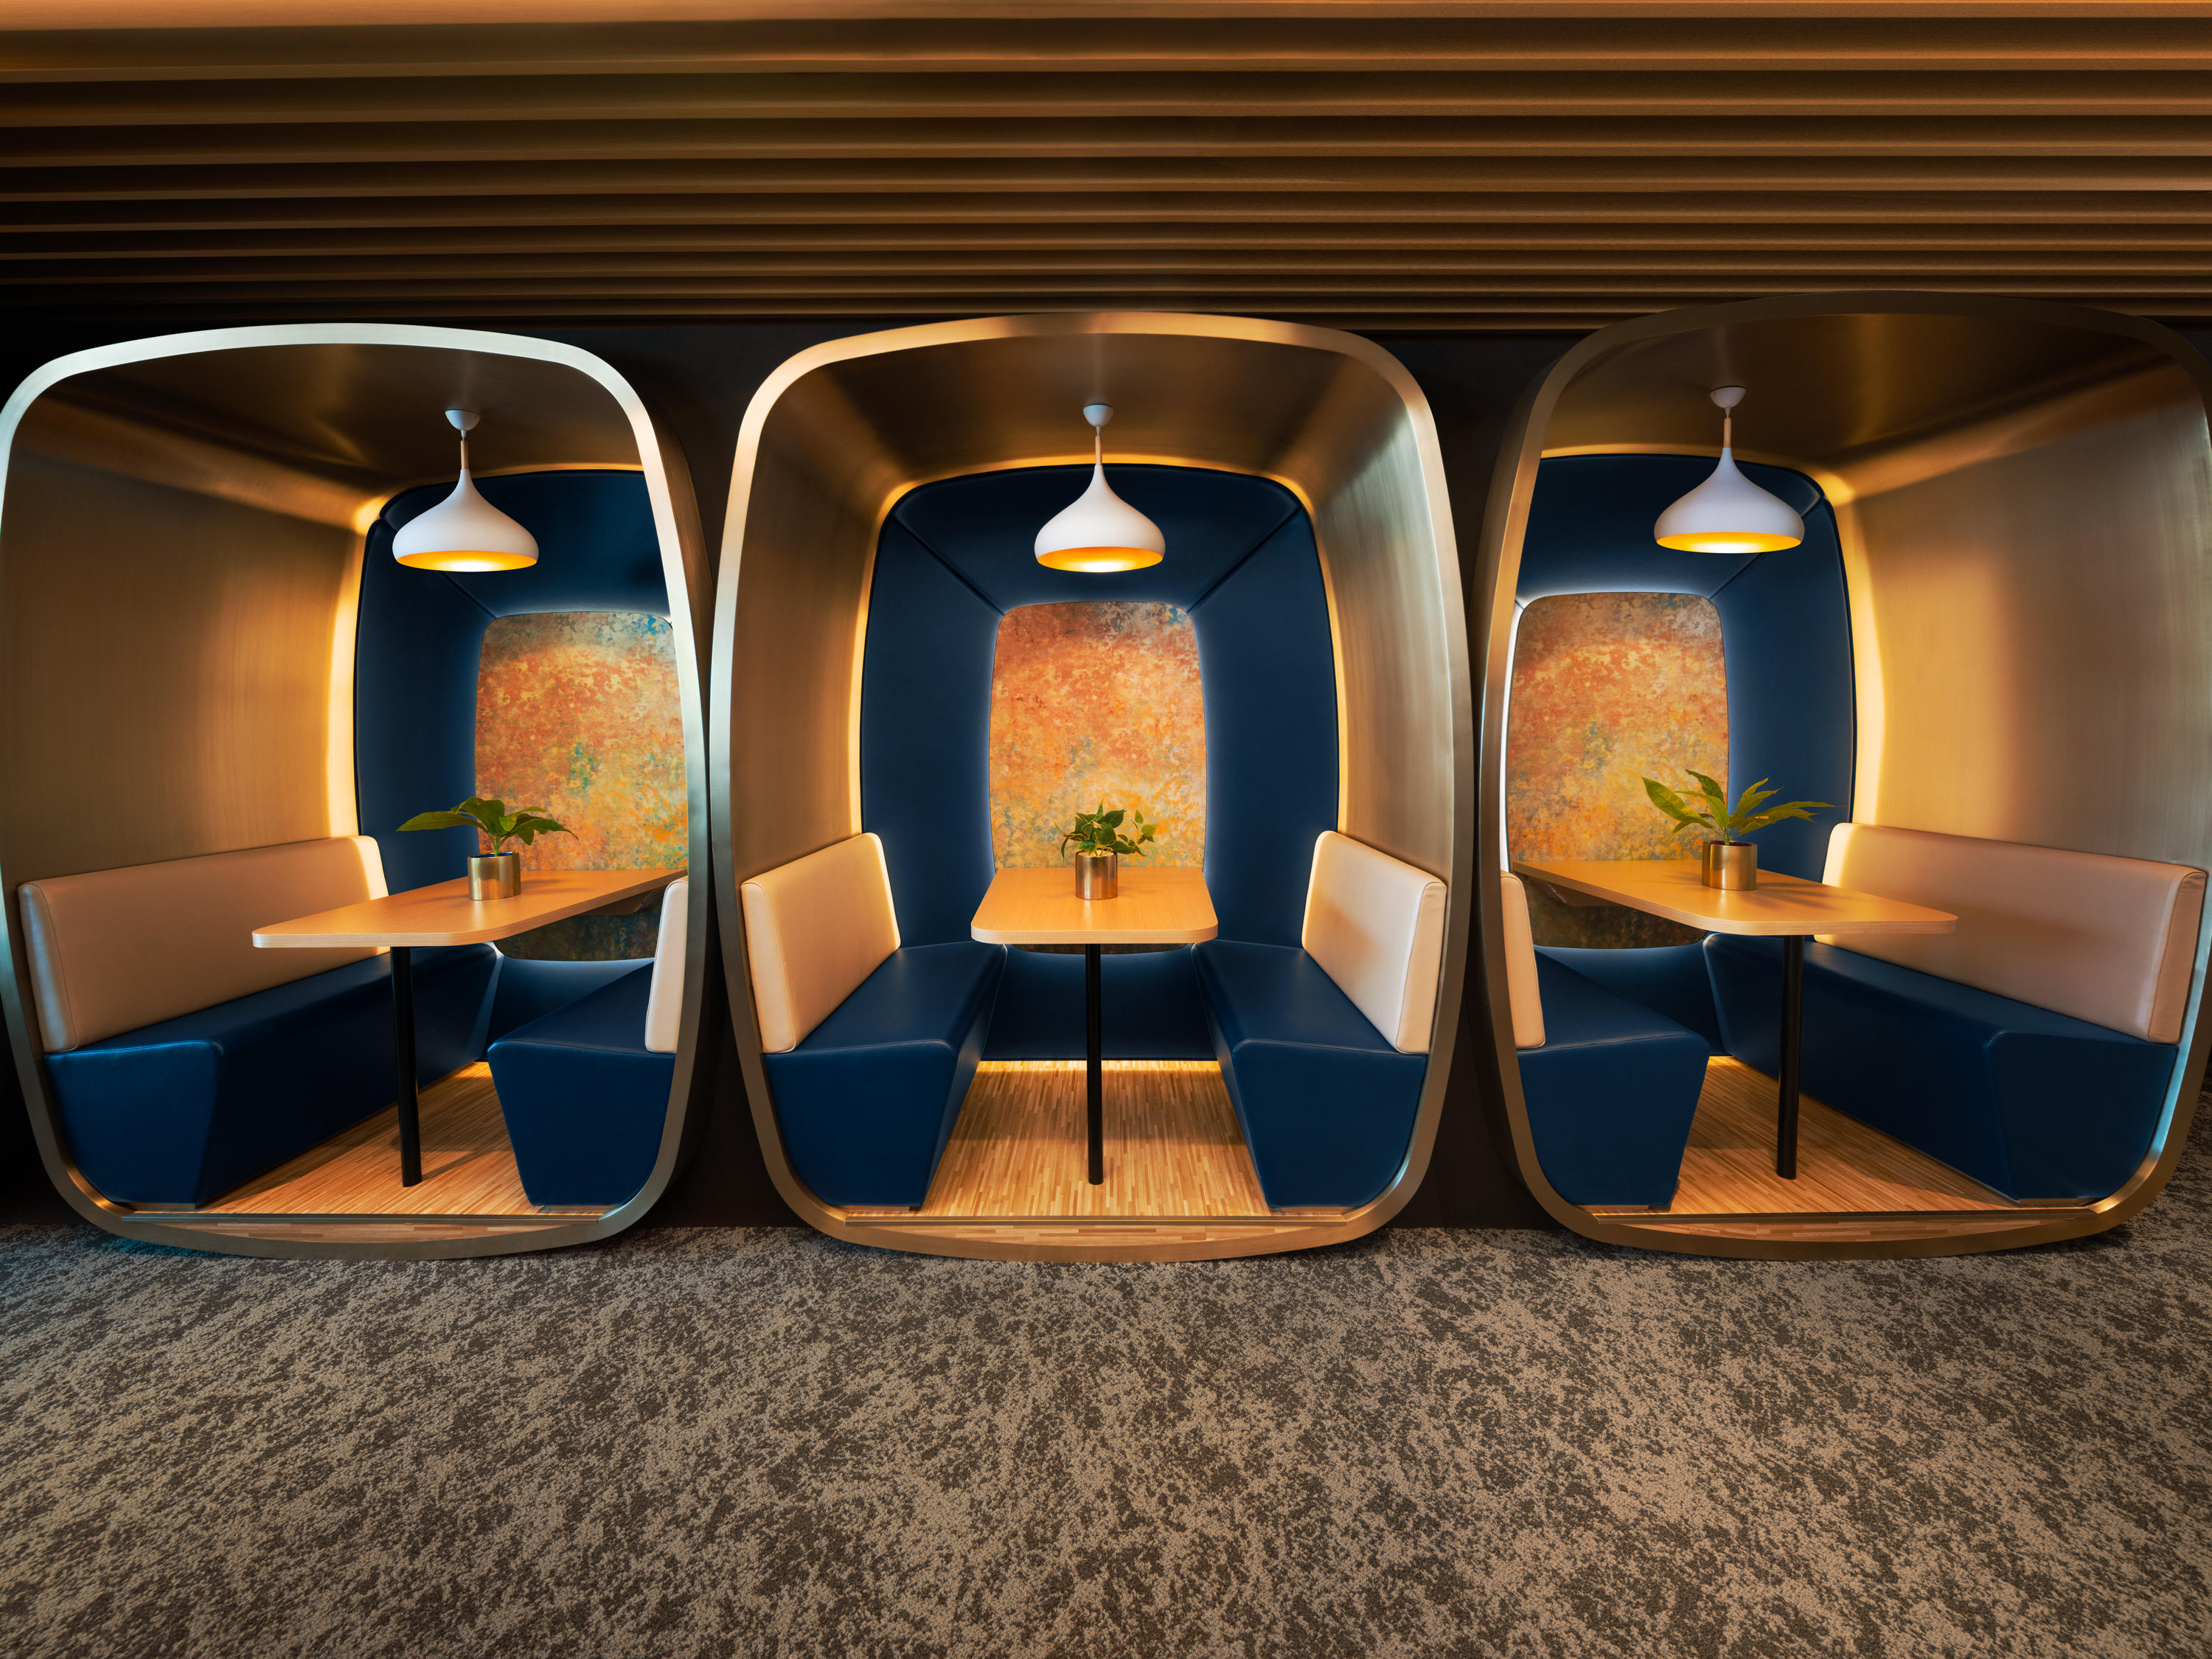 Images Chase Sapphire Lounge by The Club HKG